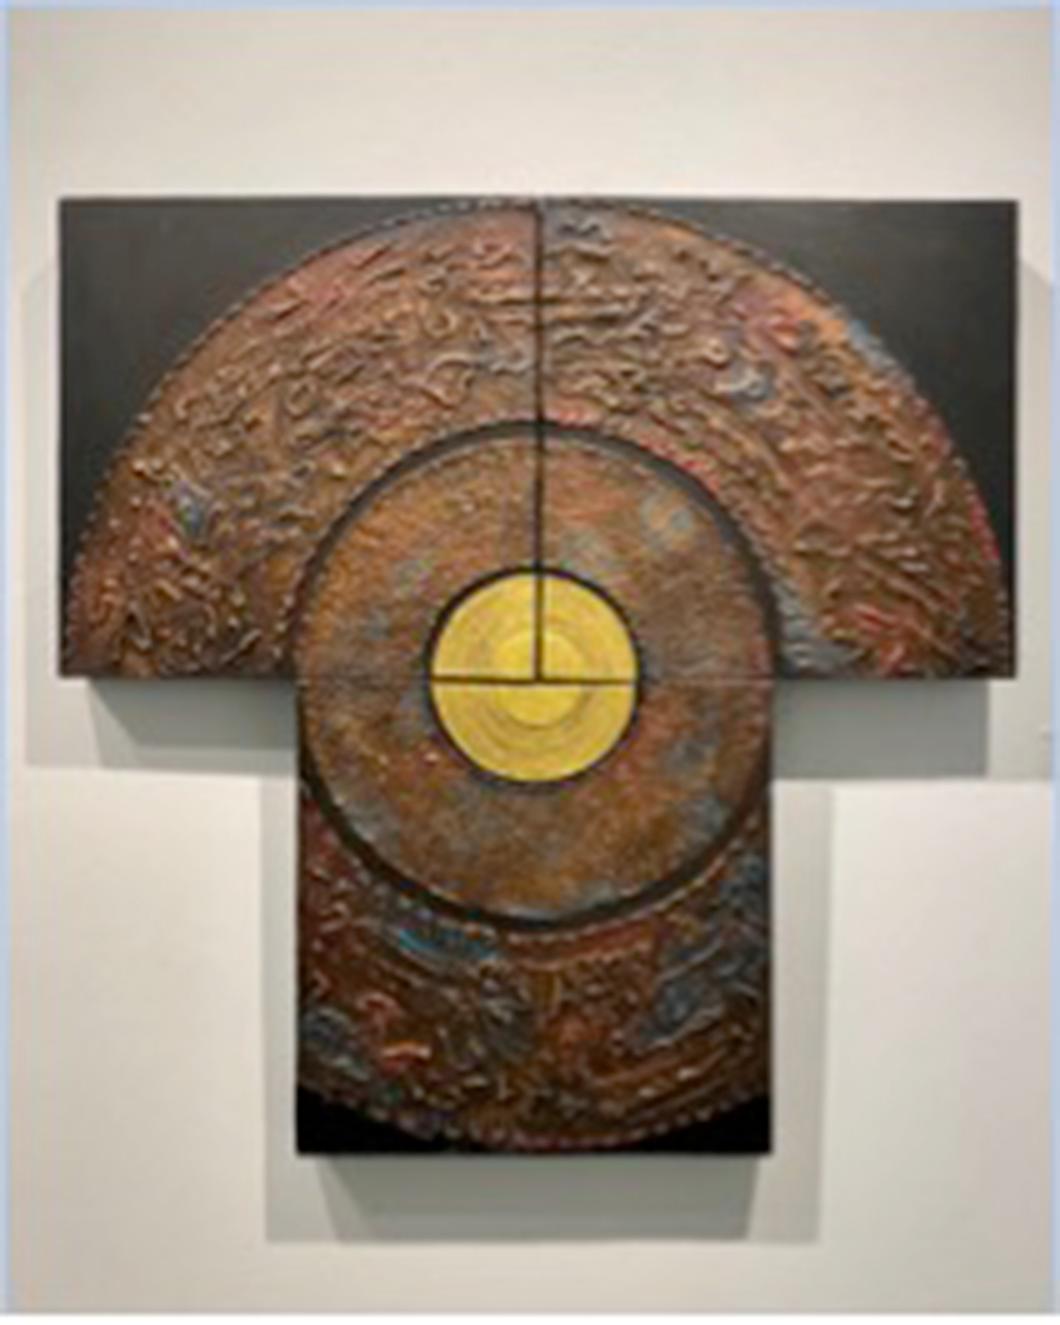 Apichai Piromrak  Figurative Painting - "The Wheel, " Acrylic, Silicon and Gold Leaf on Embossed  Handmade Paper on Wood